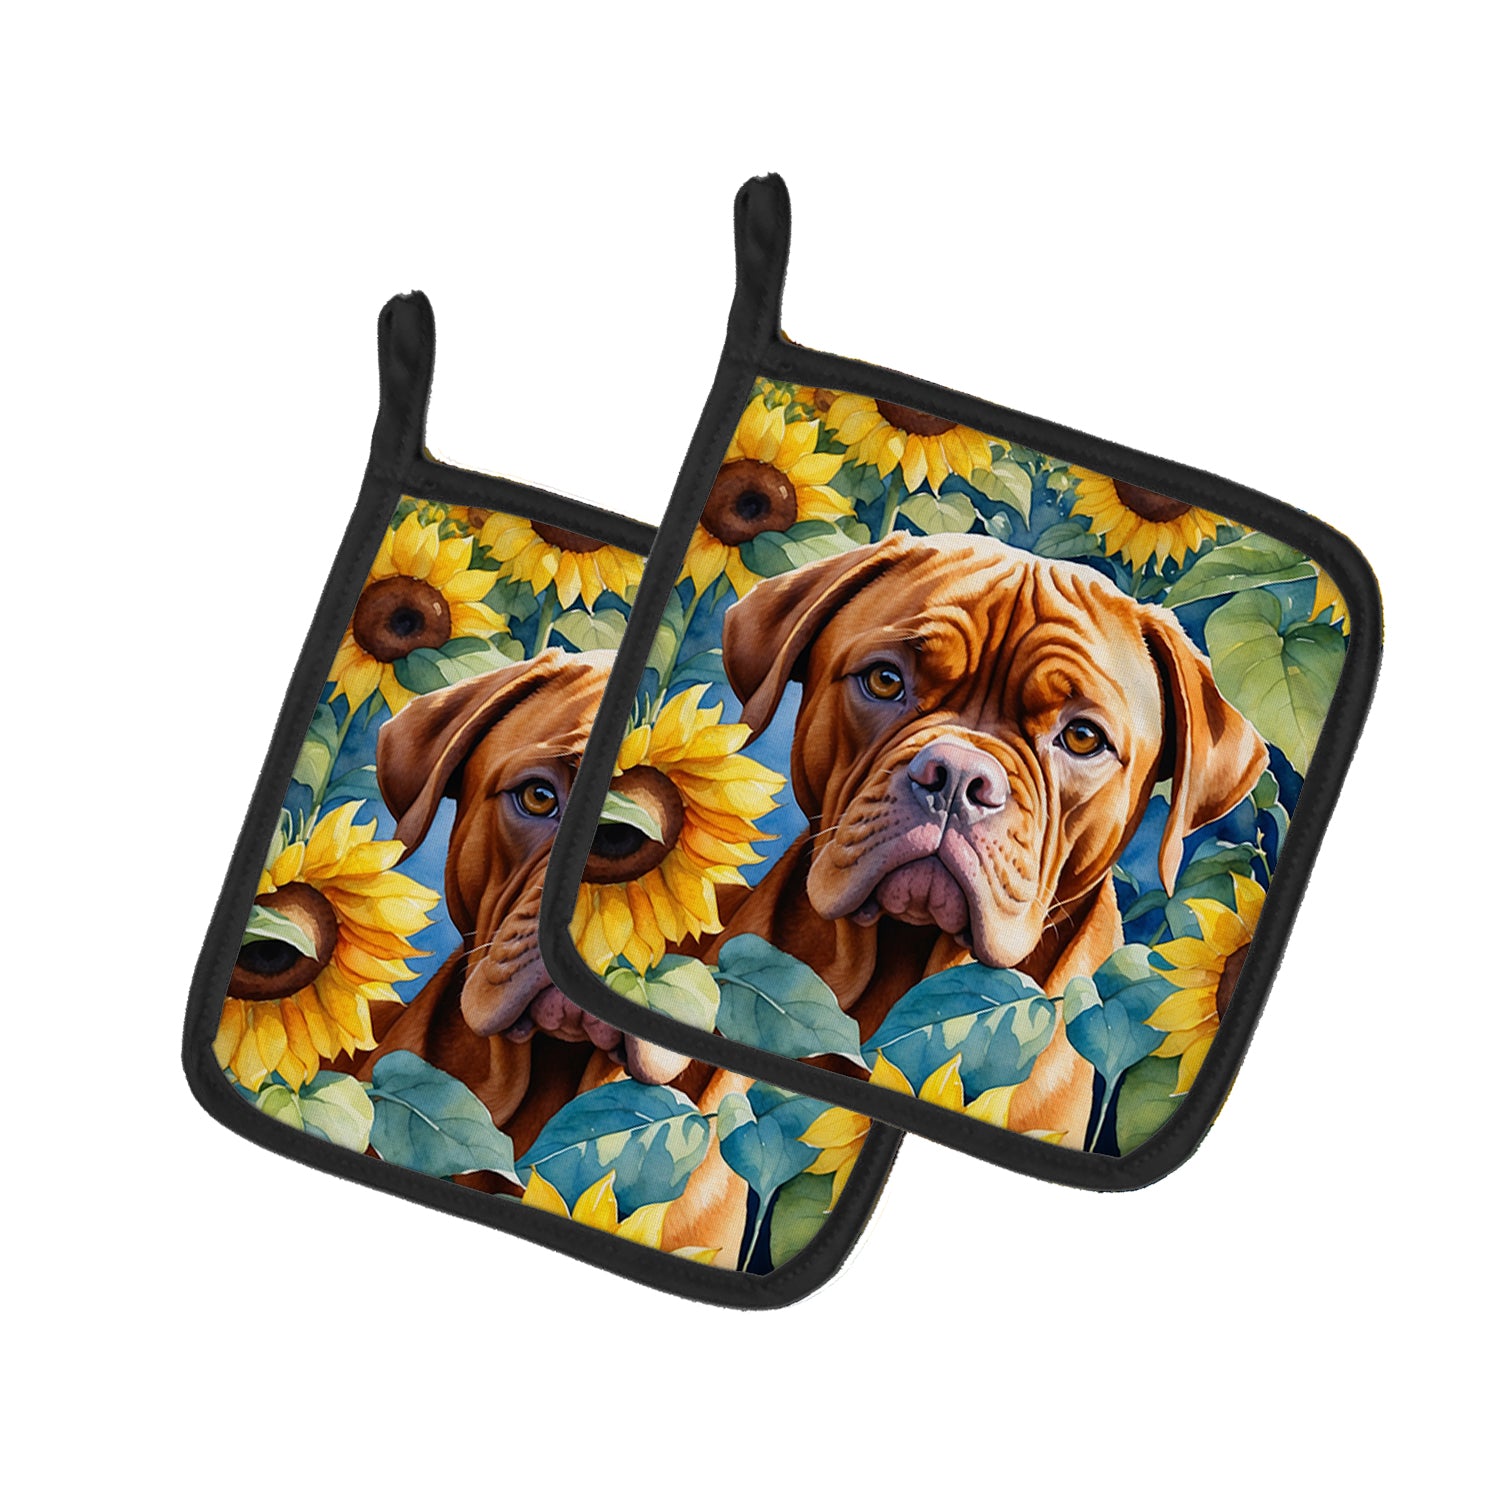 Buy this Dogue de Bordeaux in Sunflowers Pair of Pot Holders